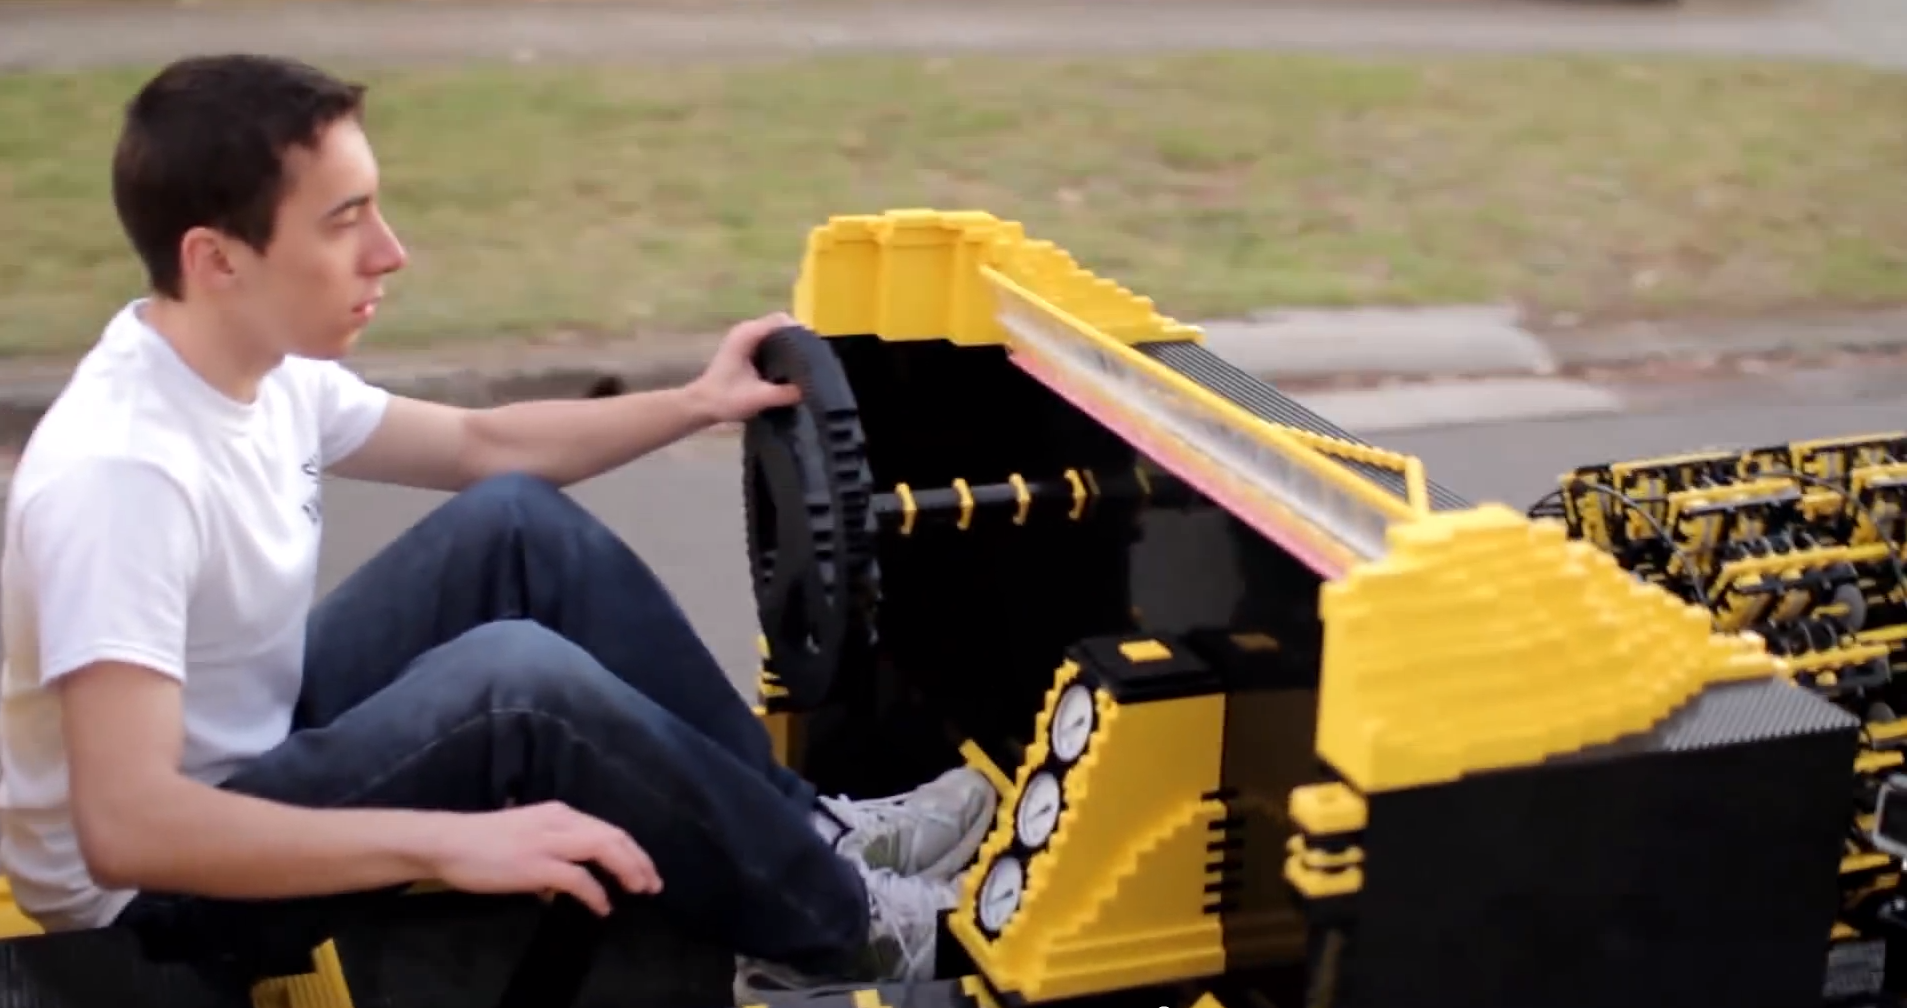 A Life-Size LEGO Car Can Actually Drive | Popular Science